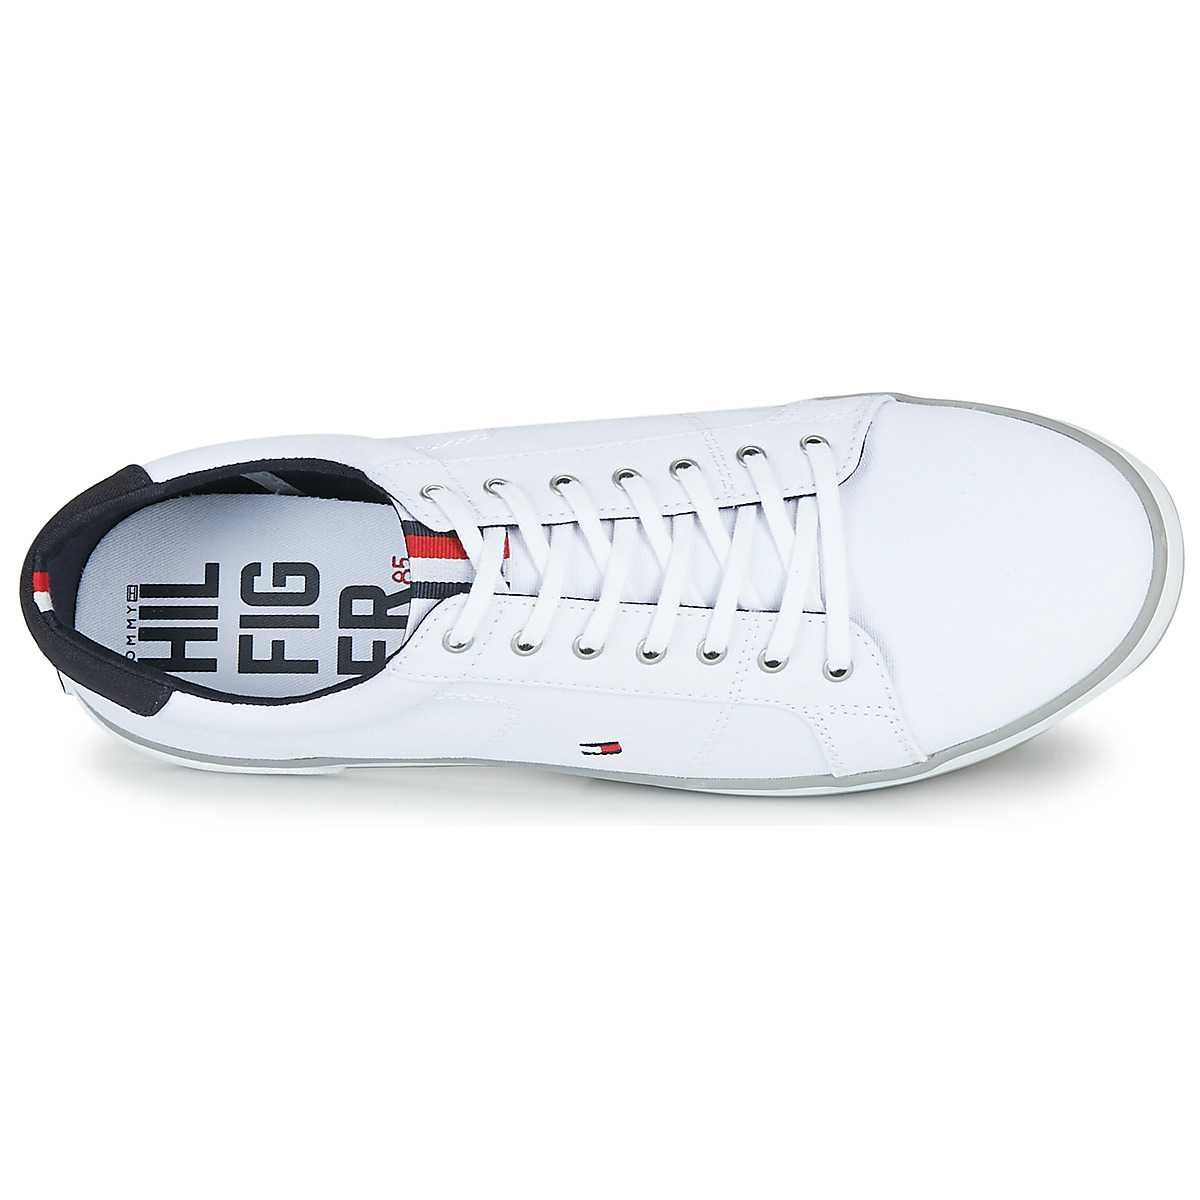 >NOI< Tenisi/sneakers low Tommy Hilfiger Harlow H2285ARLOW 1D [43]